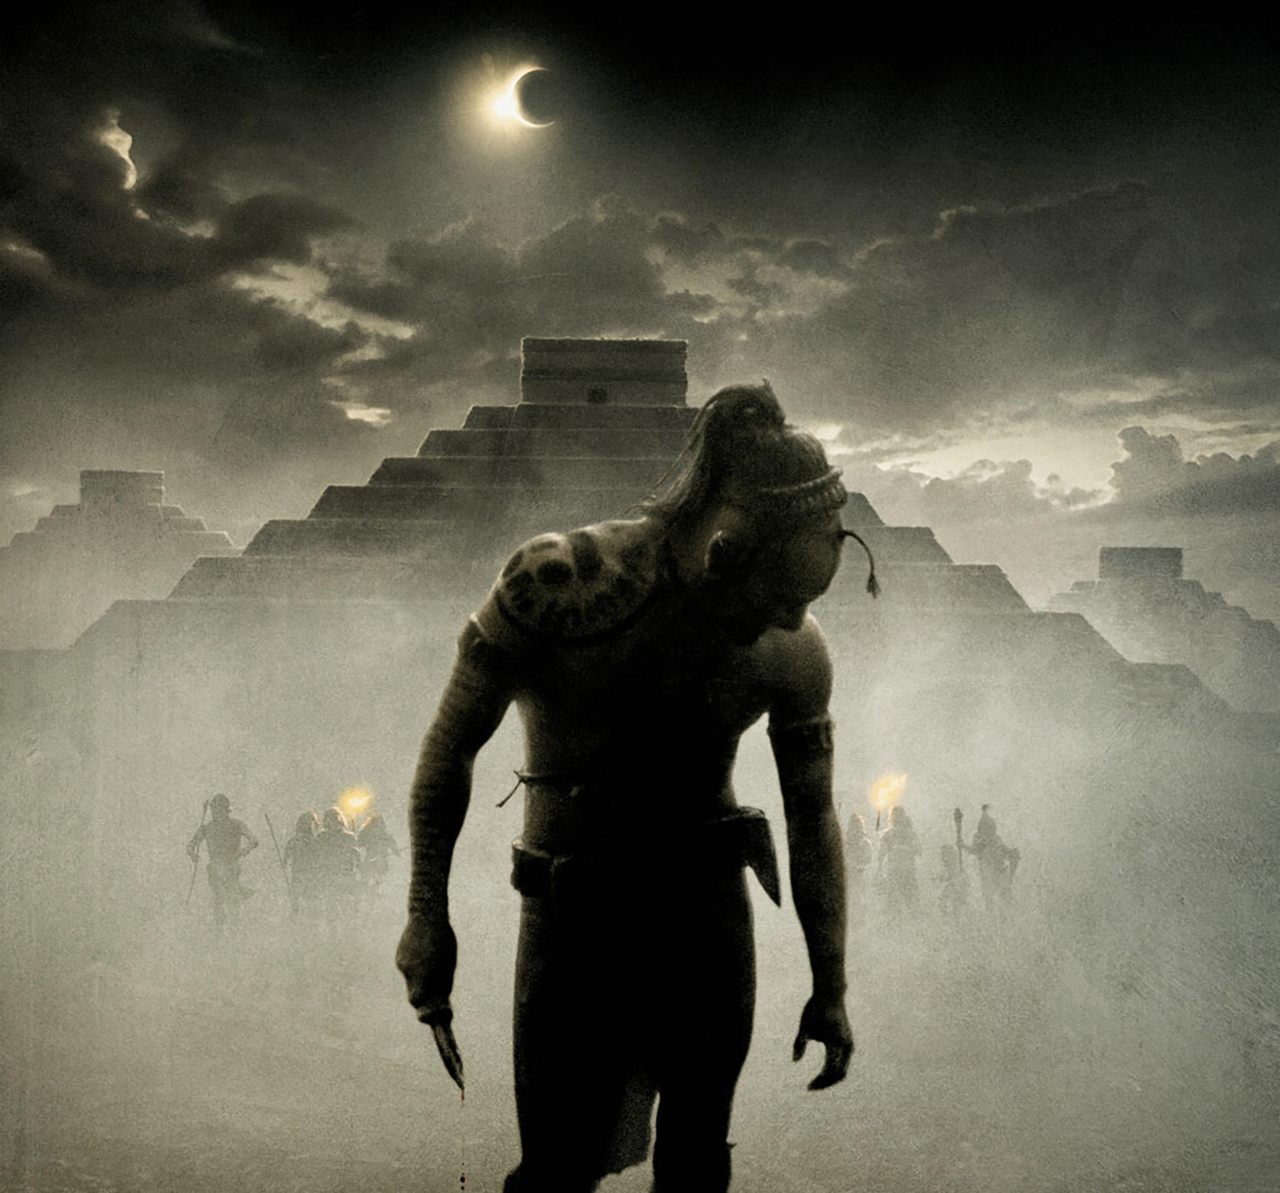 In the film <em>Apocalypto</em>, the eclipse sets off a major change and deadly series of events.